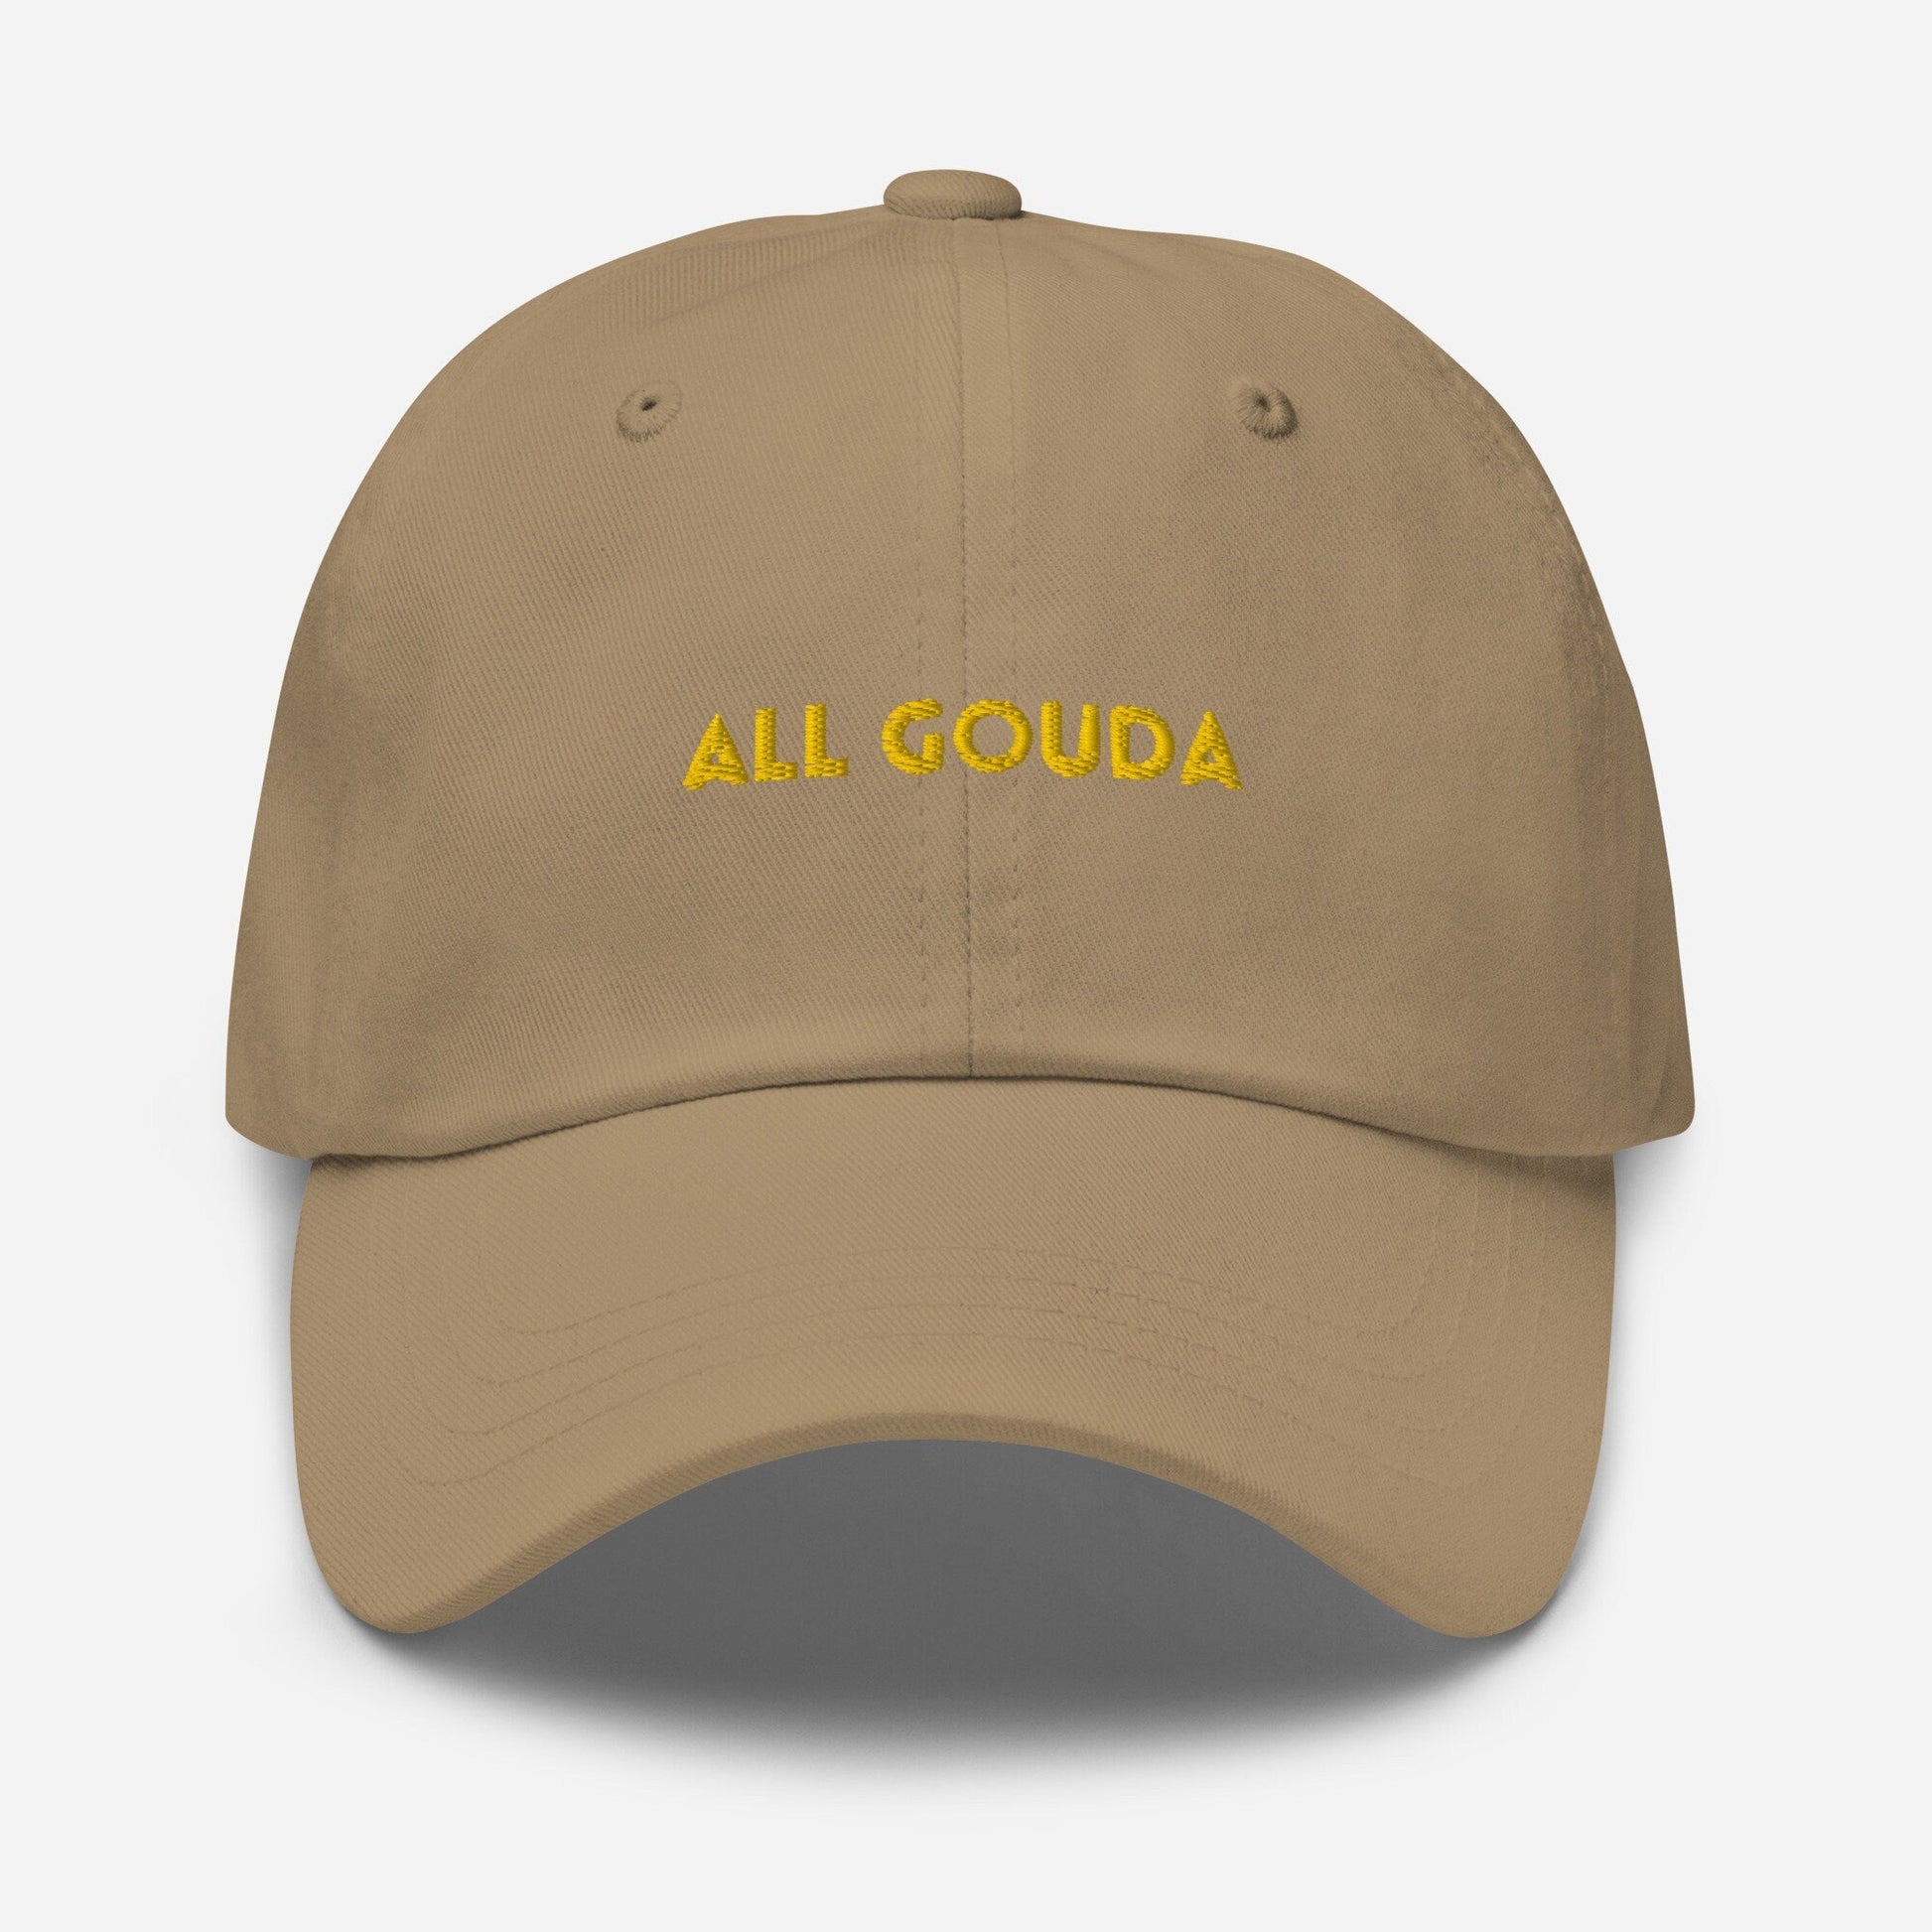 All Gouda - Gift for Cheese lovers, Home Cooks & Chefs - Embroidered Cotton Cap - Evilwater Originals